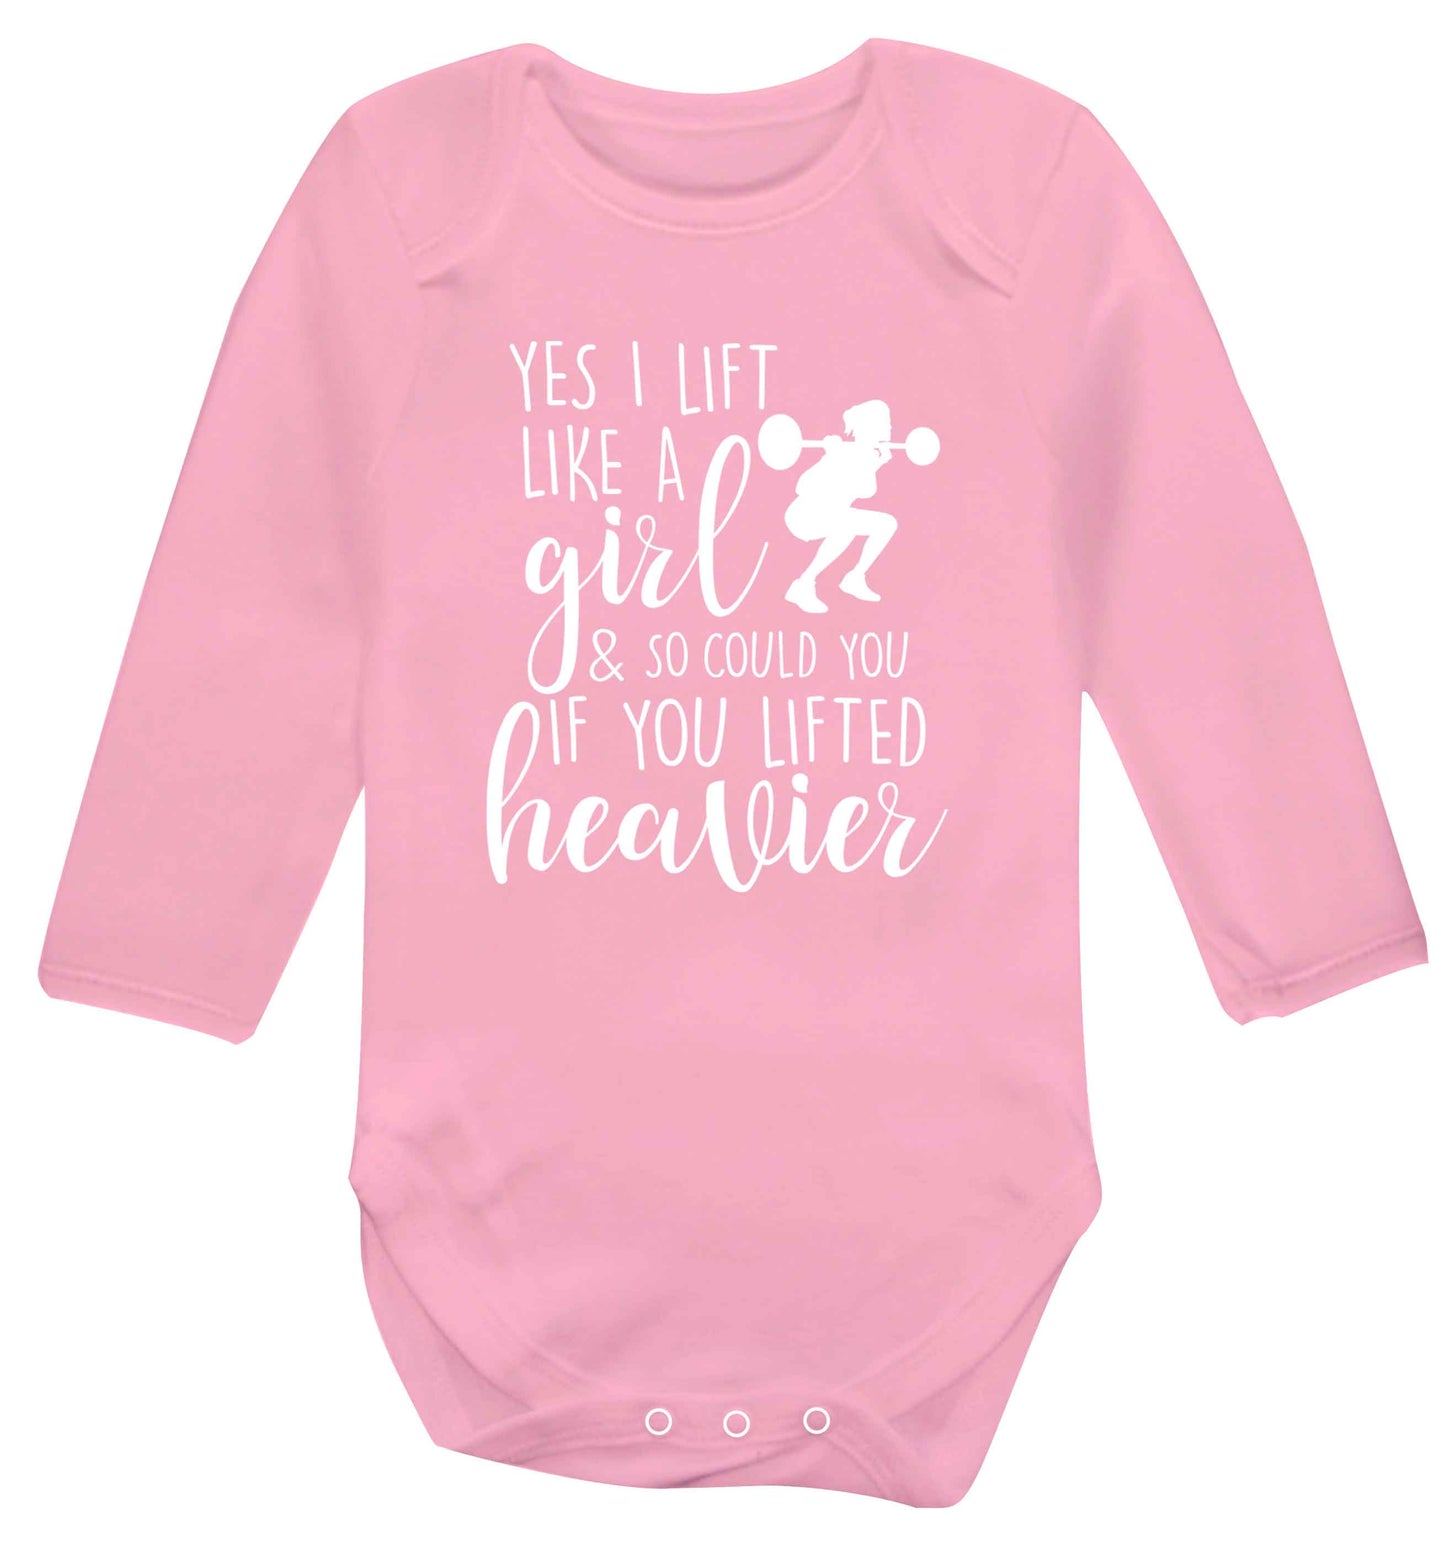 Yes I lift like a girl and so could you if you lifted heavier Baby Vest long sleeved pale pink 6-12 months